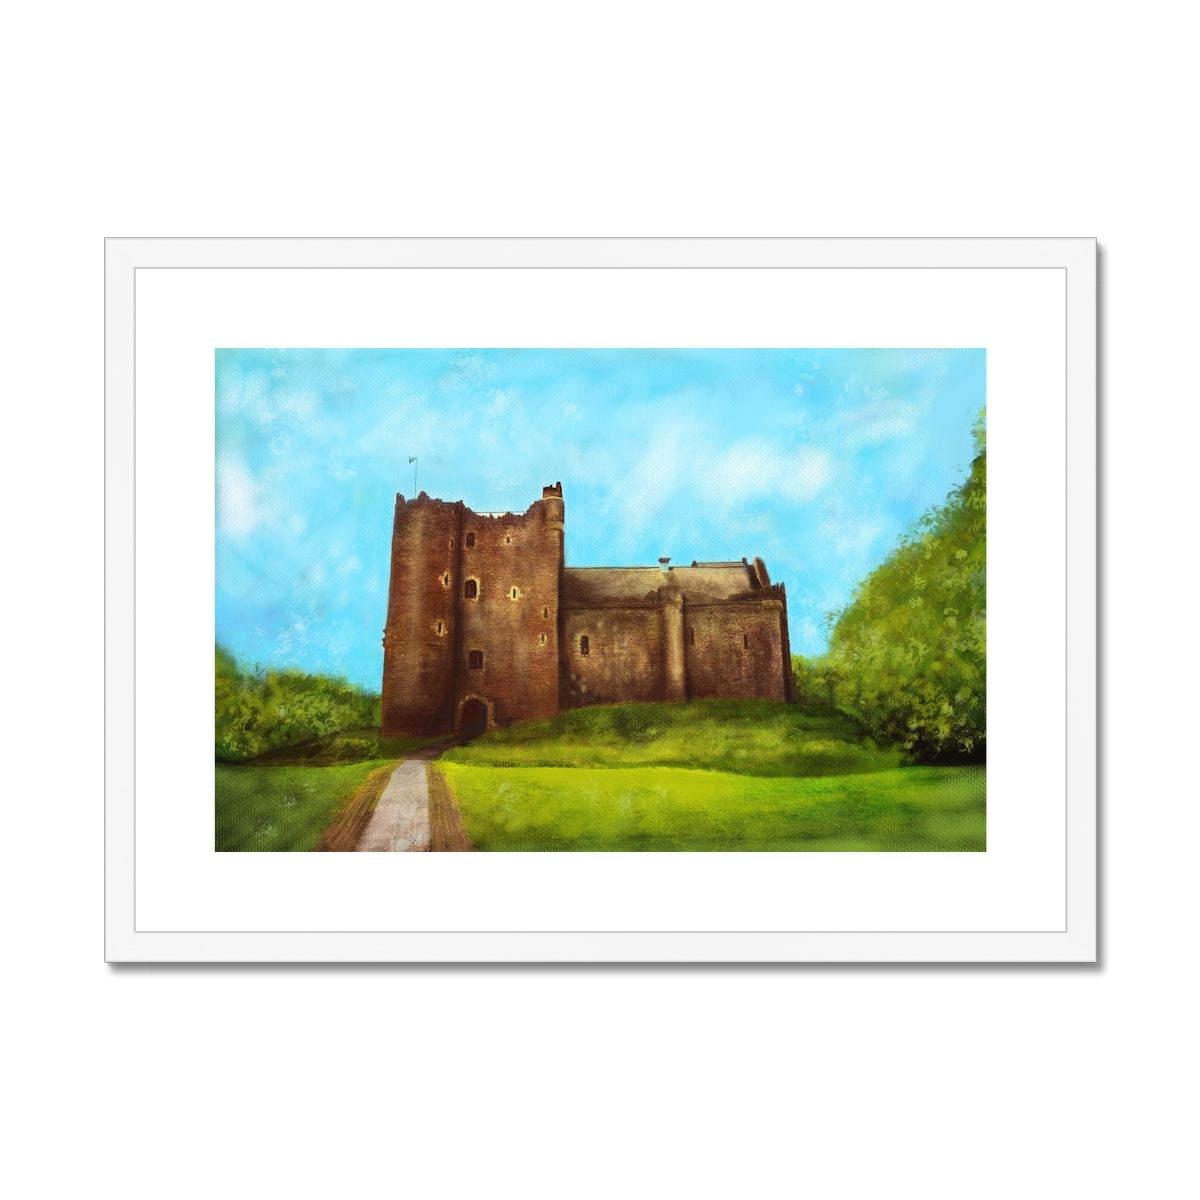 Doune Castle Painting | Framed & Mounted Prints From Scotland-Framed & Mounted Prints-Historic & Iconic Scotland Art Gallery-A2 Landscape-White Frame-Paintings, Prints, Homeware, Art Gifts From Scotland By Scottish Artist Kevin Hunter